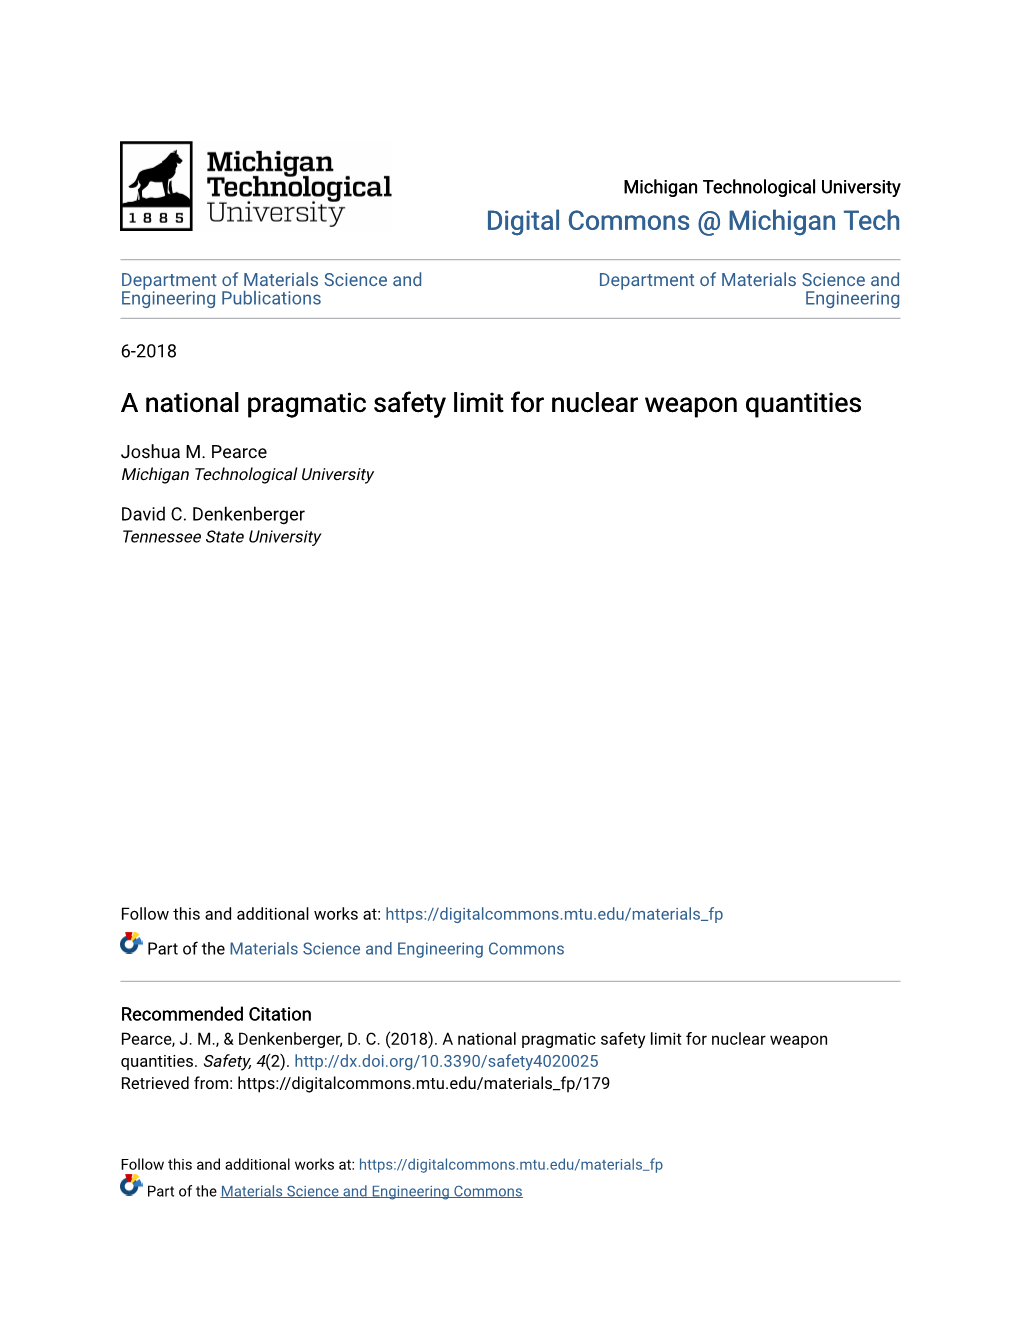 A National Pragmatic Safety Limit for Nuclear Weapon Quantities